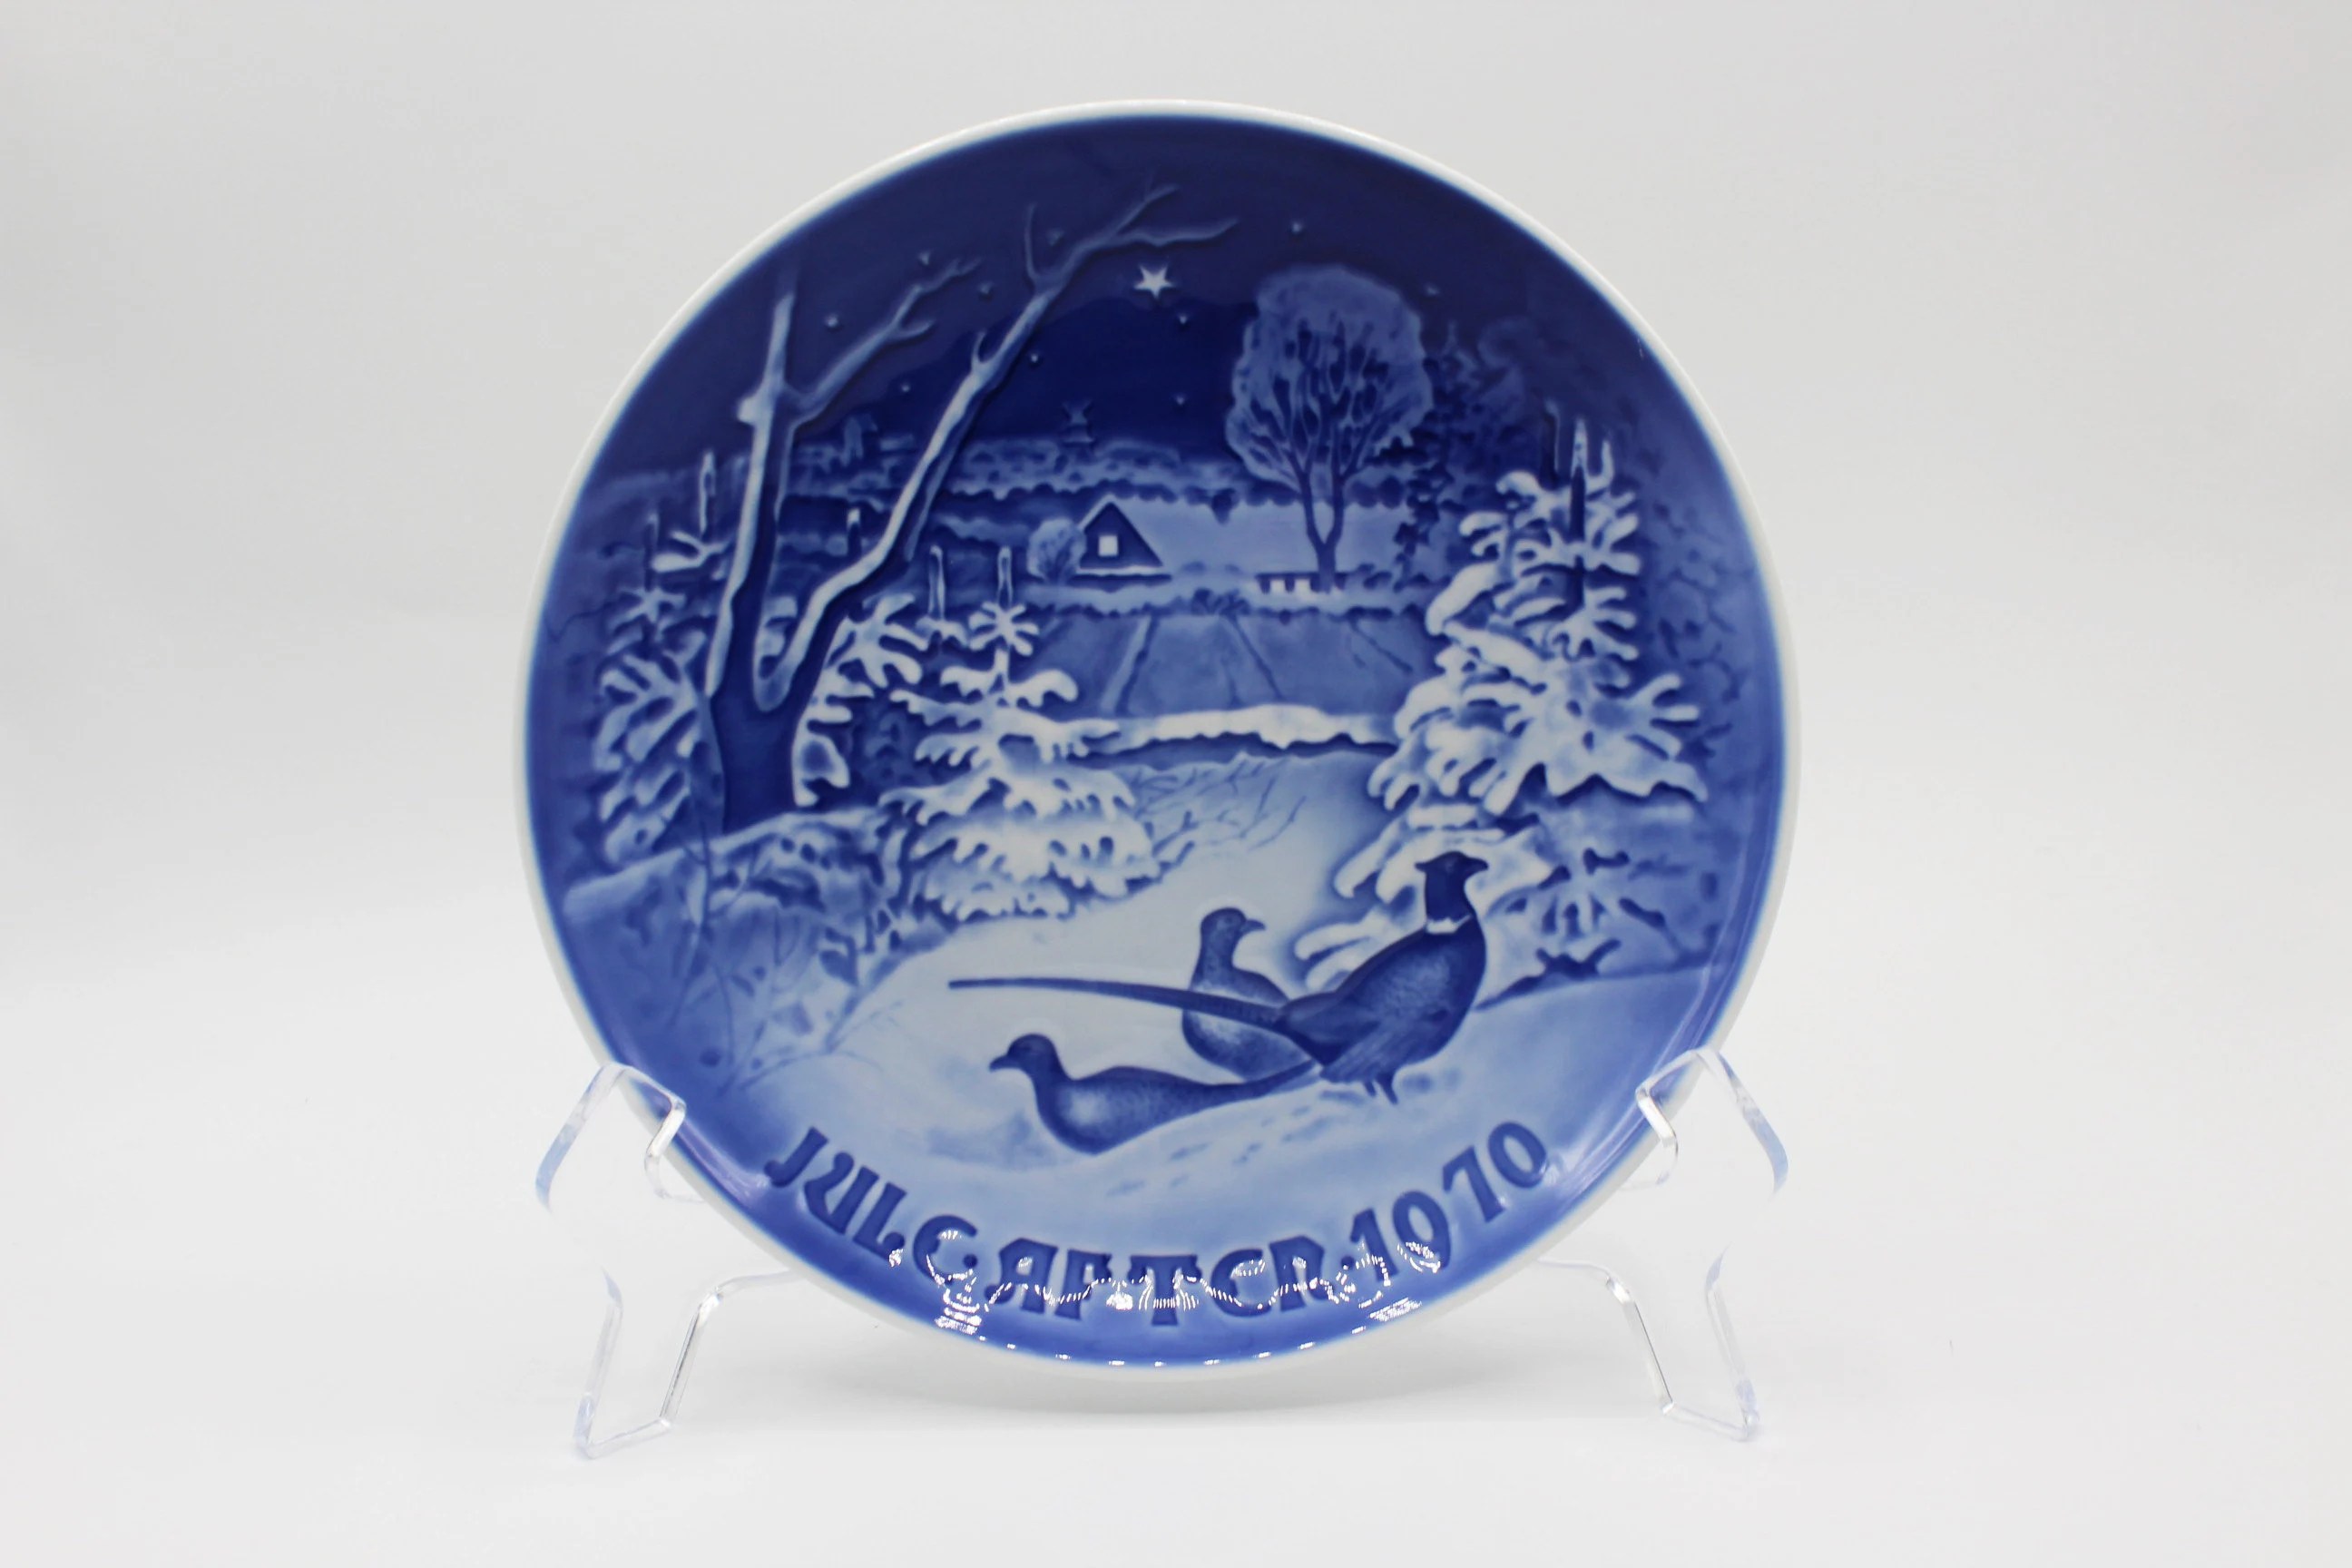 1970 B&G – Bing and Grondahl – Pheasants in the Snow at Christmas – Blue and White Decorative Collectors Plate at Whispering City RVA